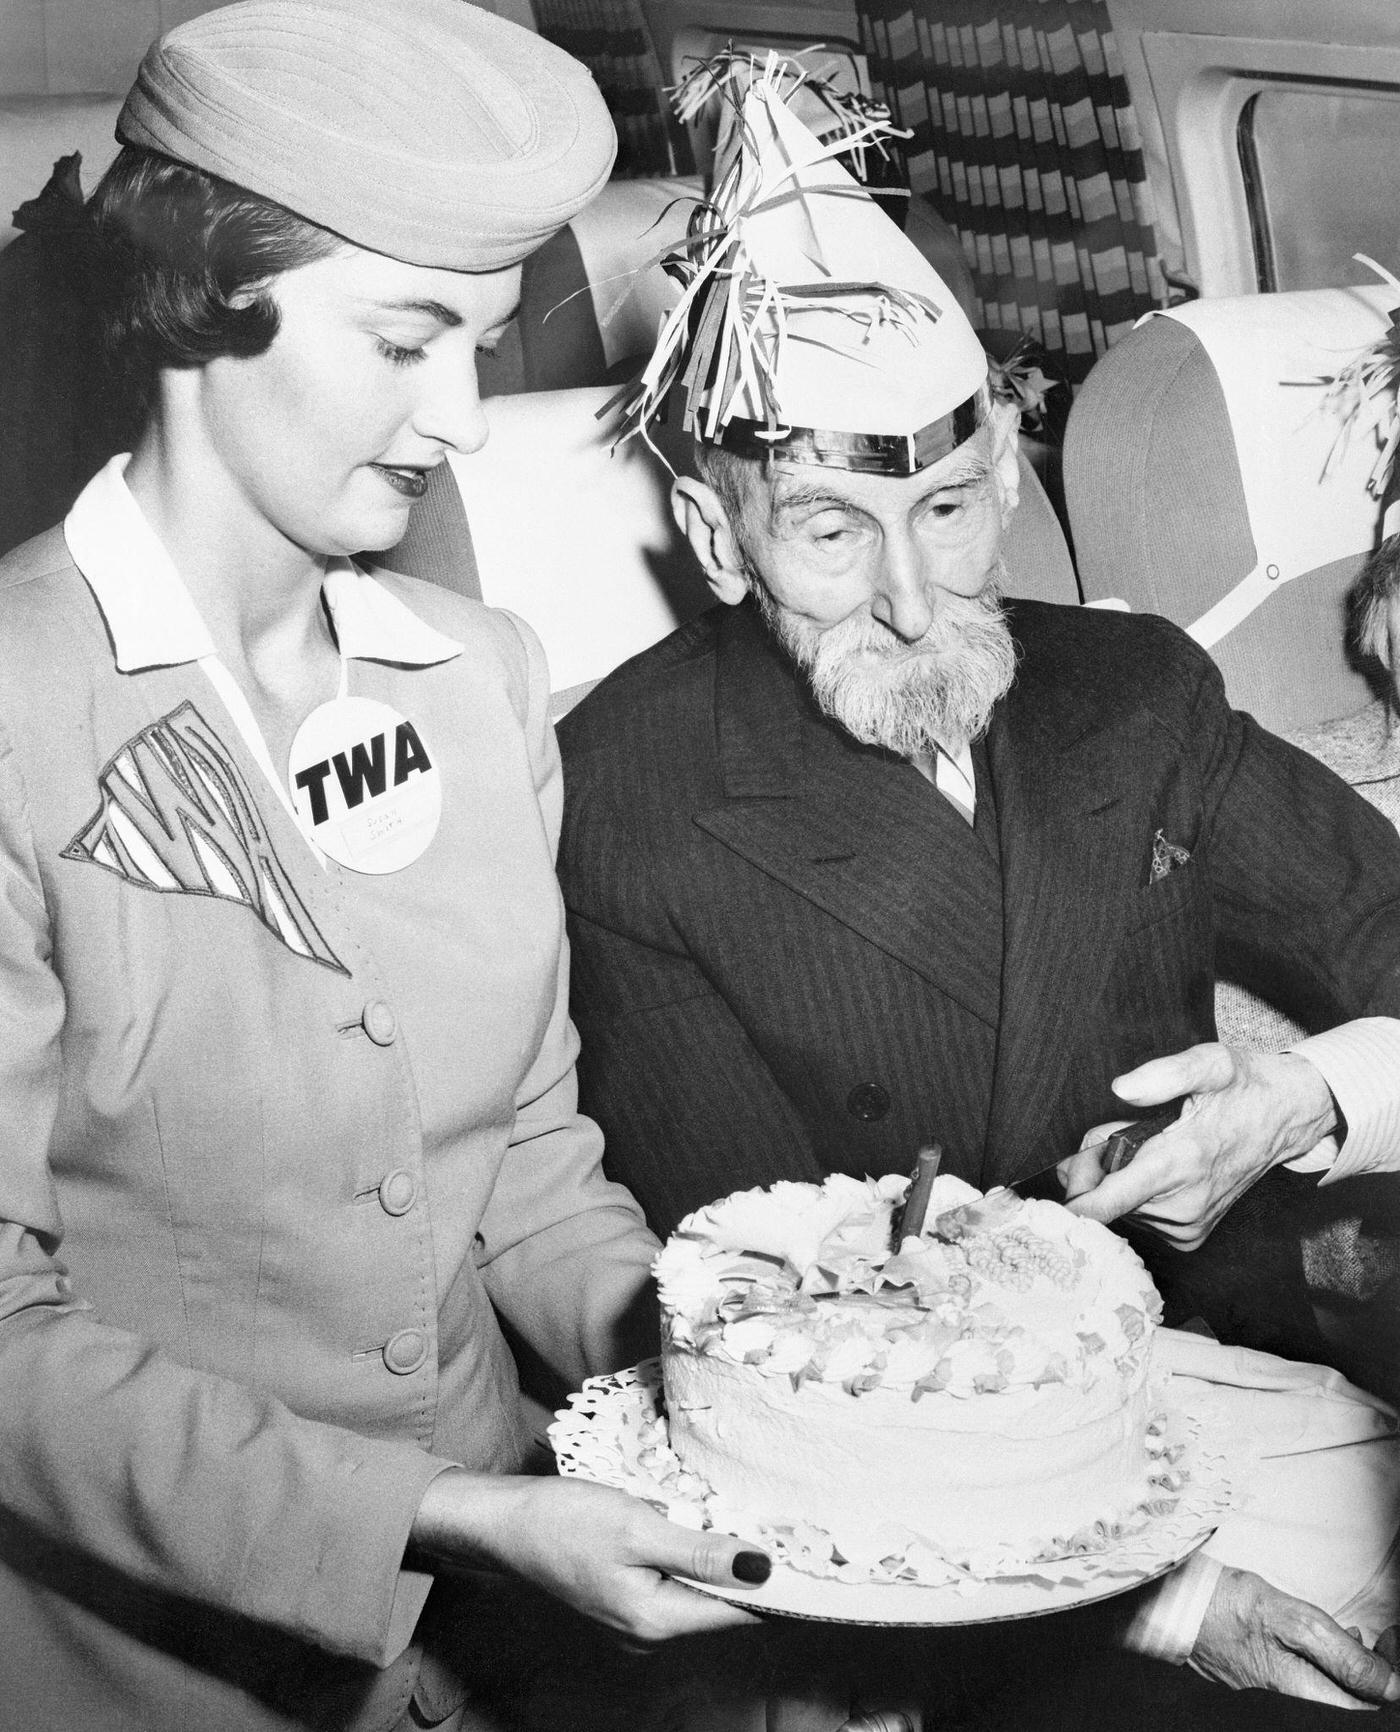 Kentucky Colonel Ward Elmore, who is one of 25 people from the Laguna Honda Home in San Francisco, makes his first plane flight on August 22, 195?, and also celebrates his first 100 years.